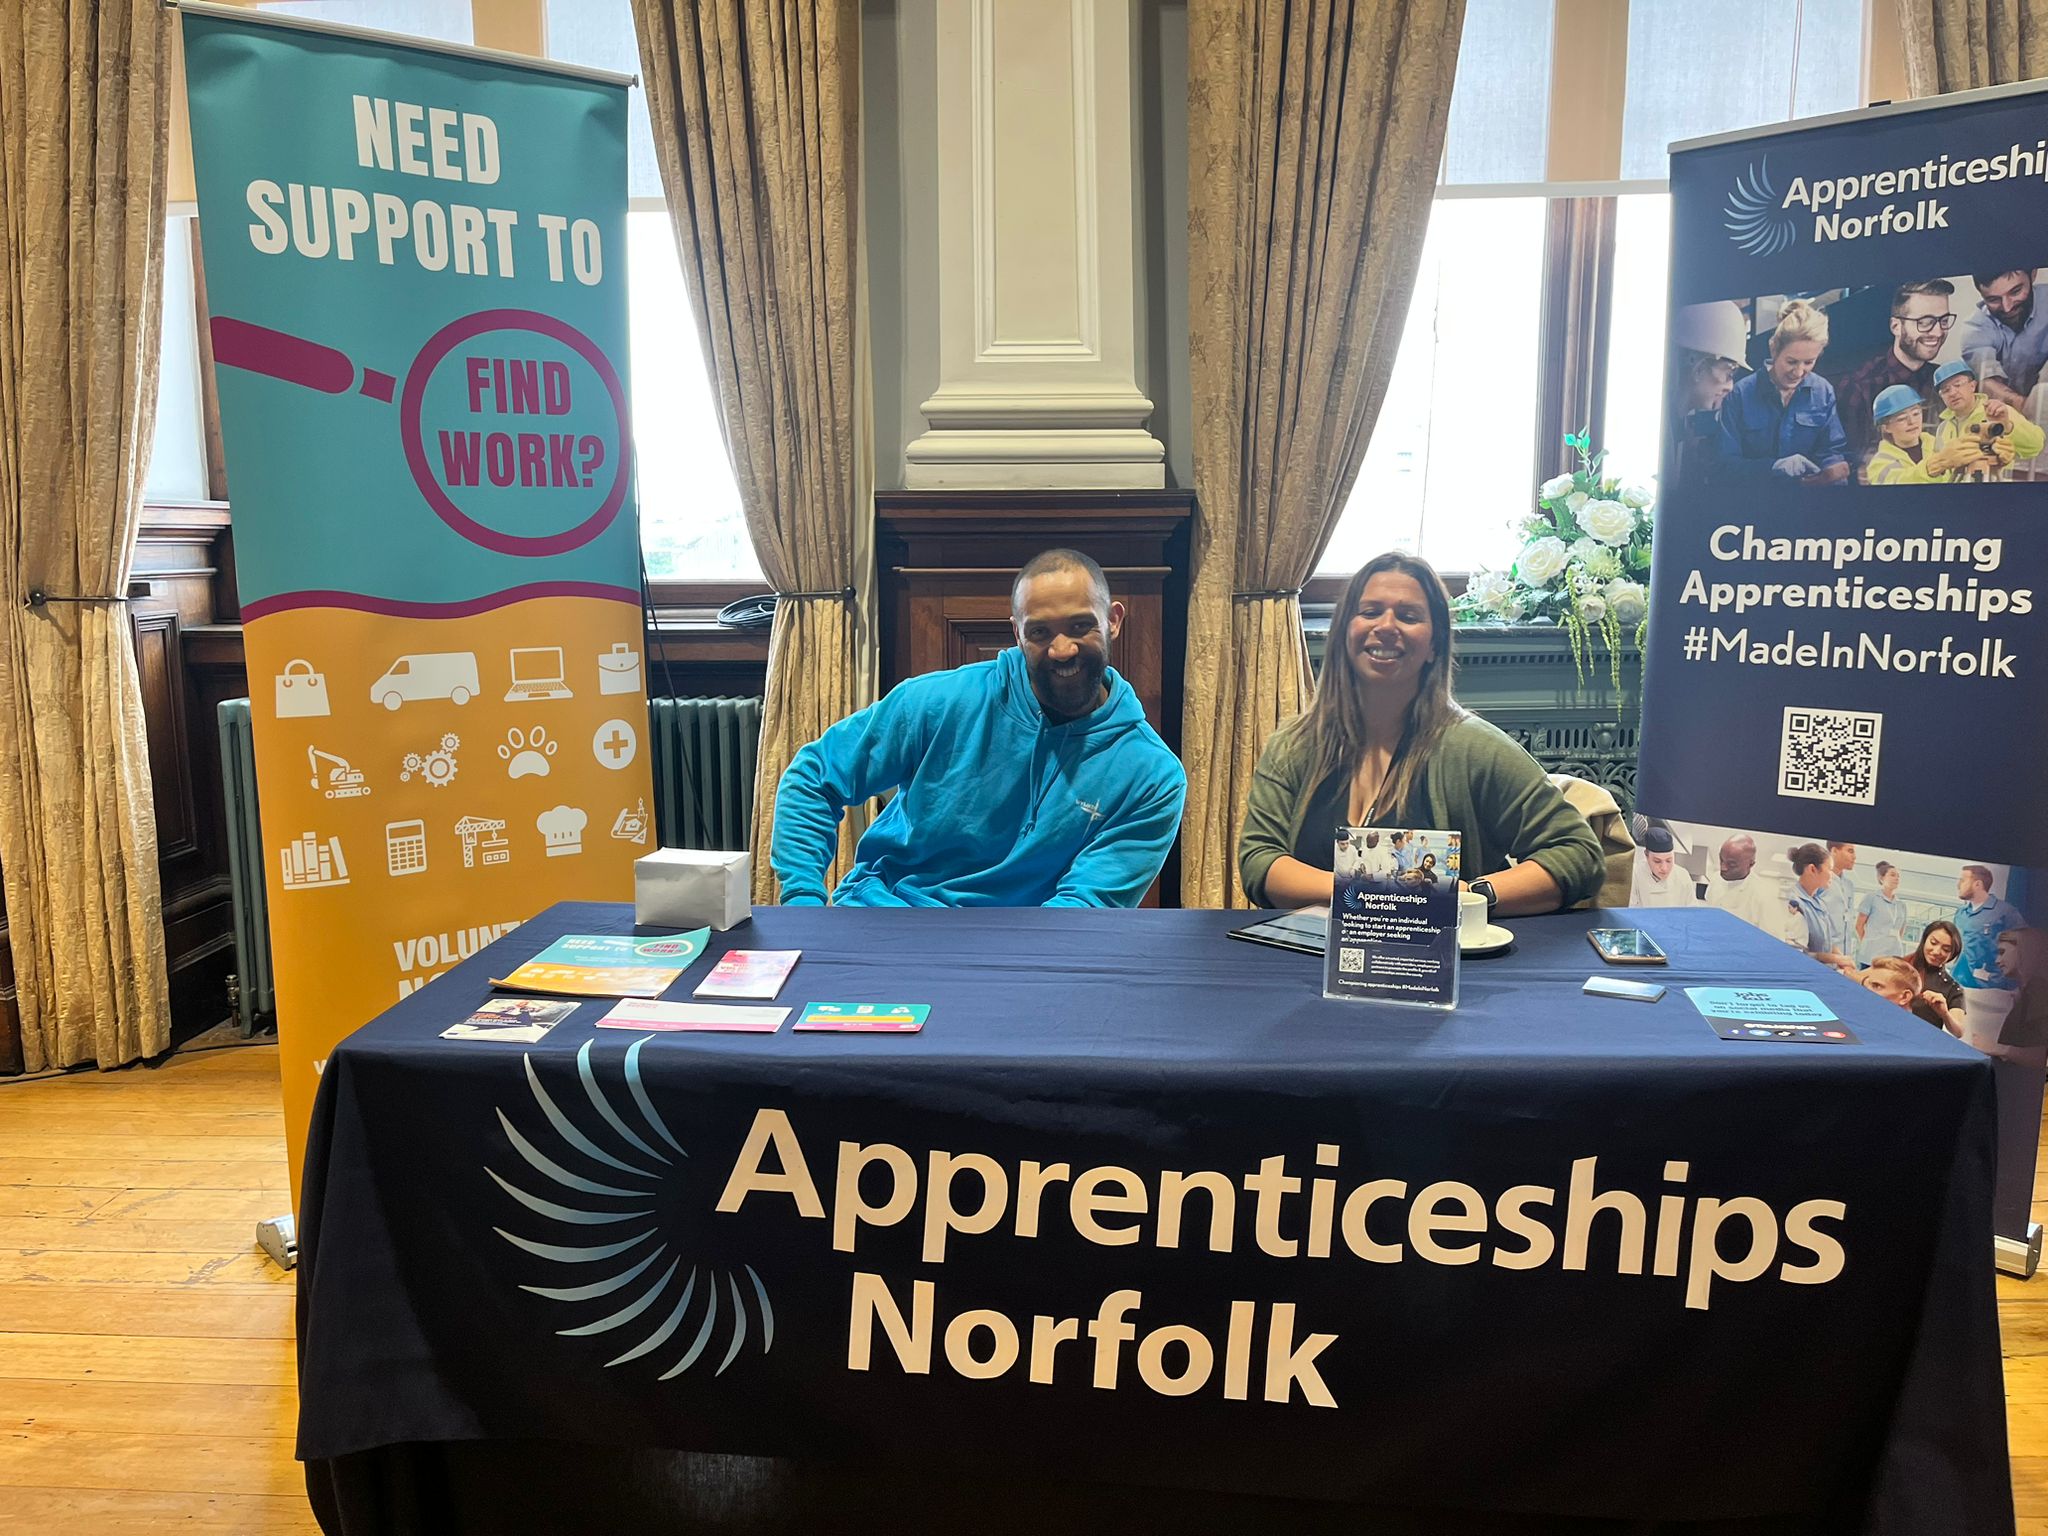 Chances Voluntary Norfolk/Apprenticeships at our event in Great Yarmouth